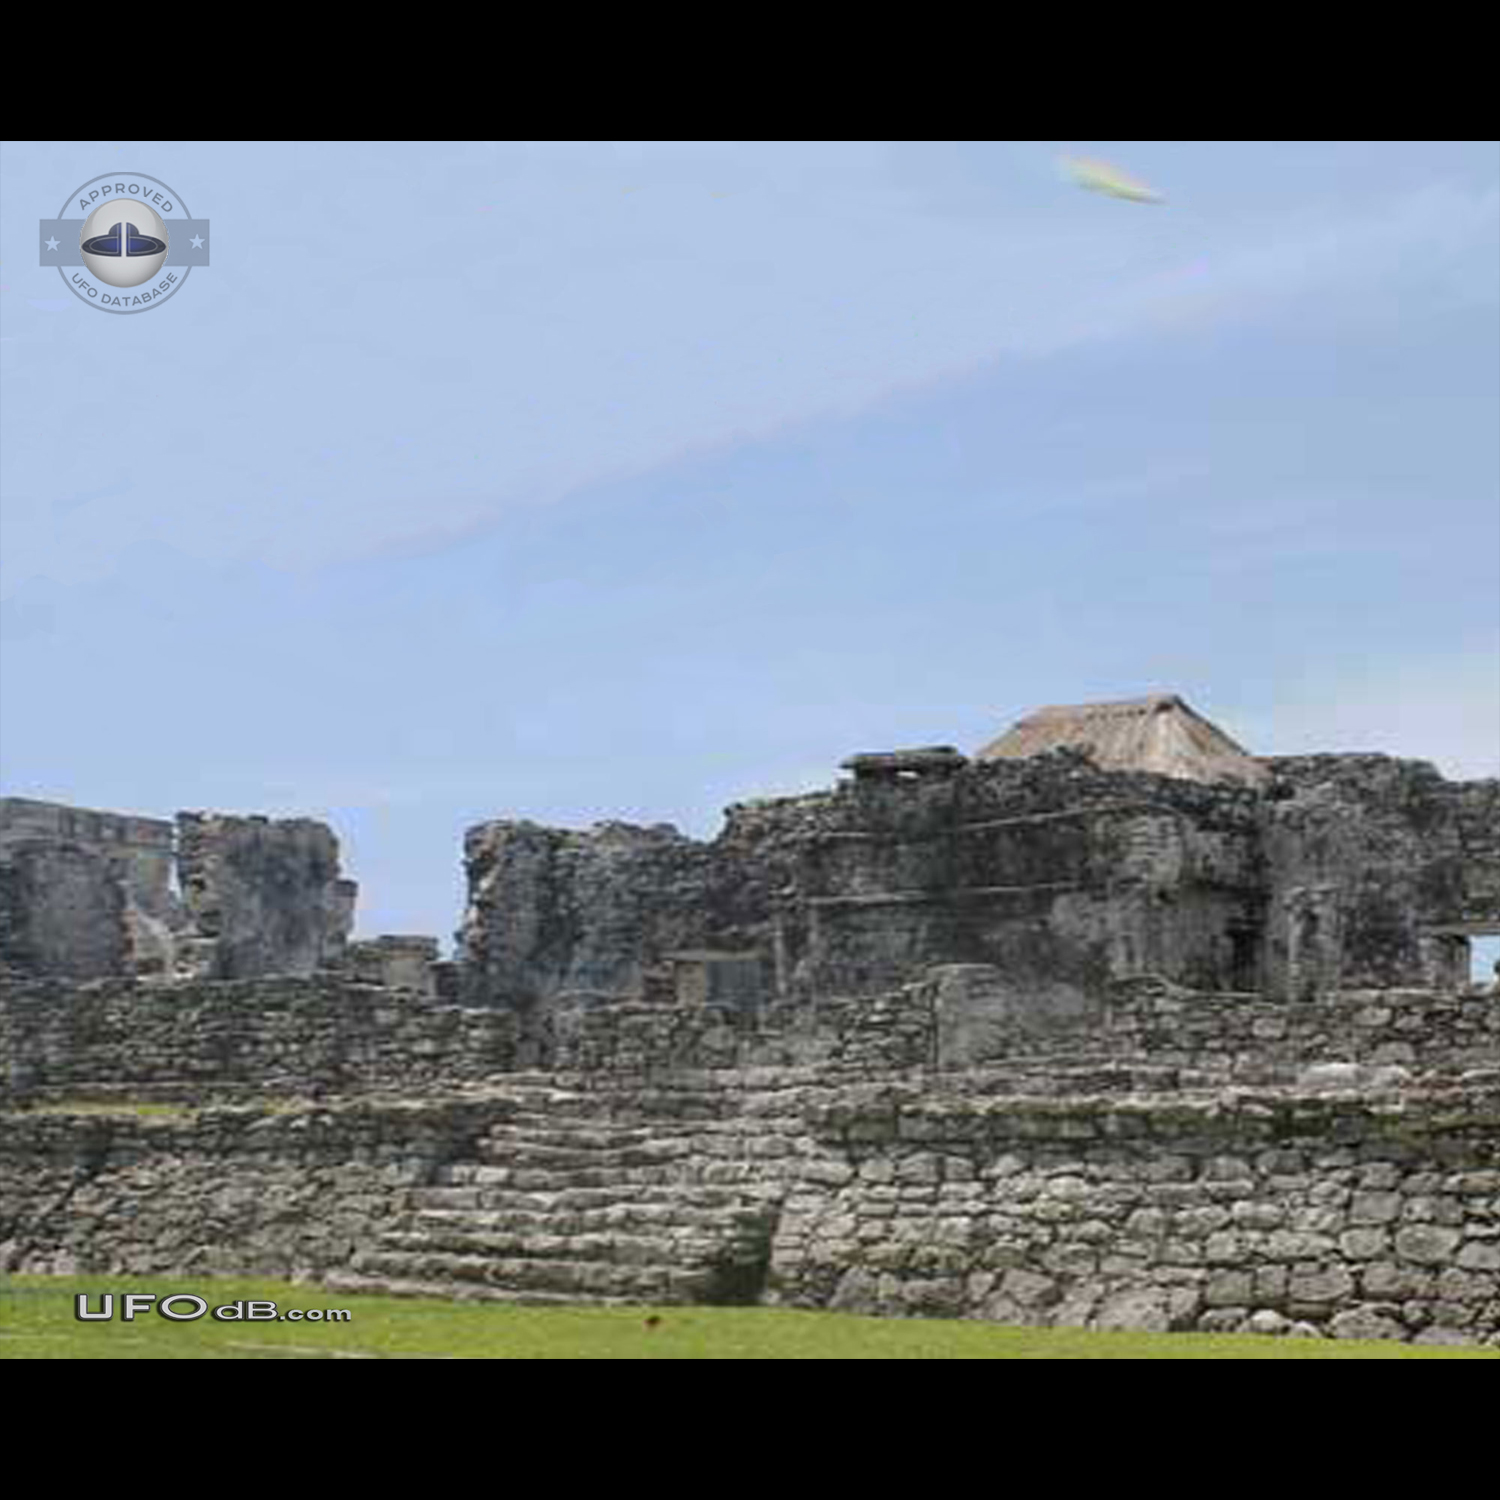 Saucer UFO caught on picture near the Maya city ruins of Tulum - 2011 UFO Picture #413-1